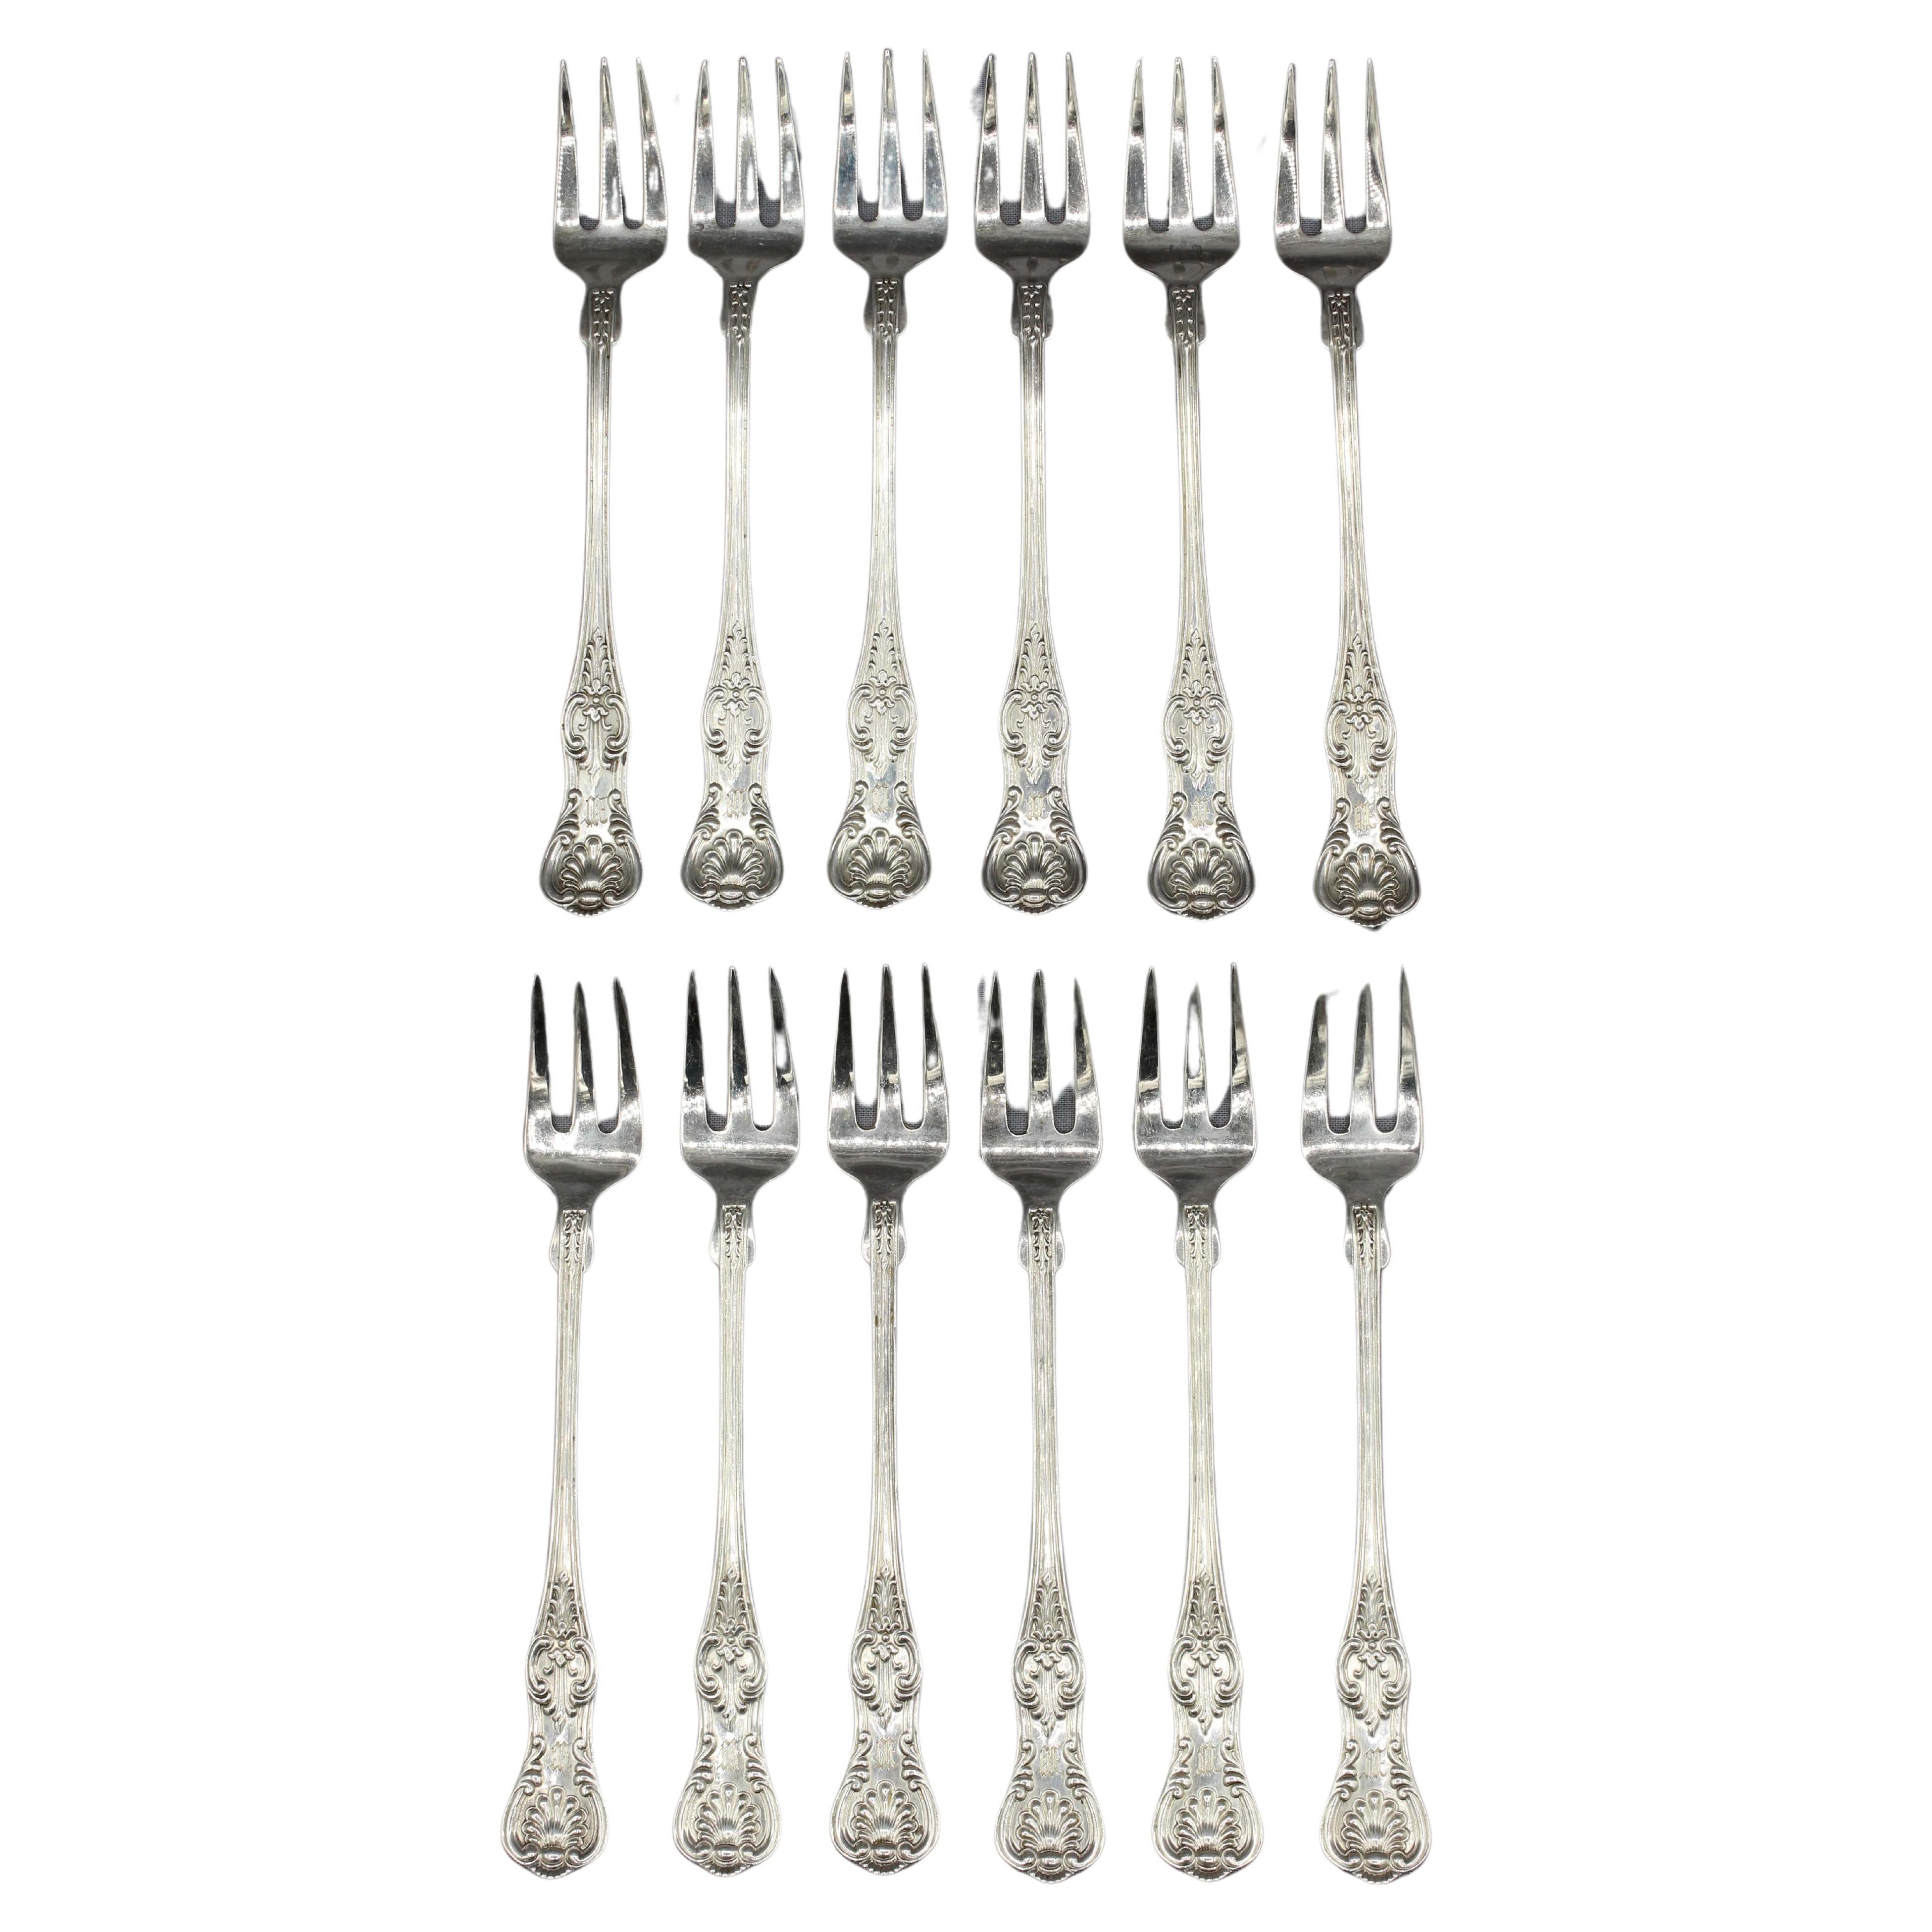 c. 1900 Set of 12 Sterling Silver Seafood Forks by Dominick & Haff For Sale